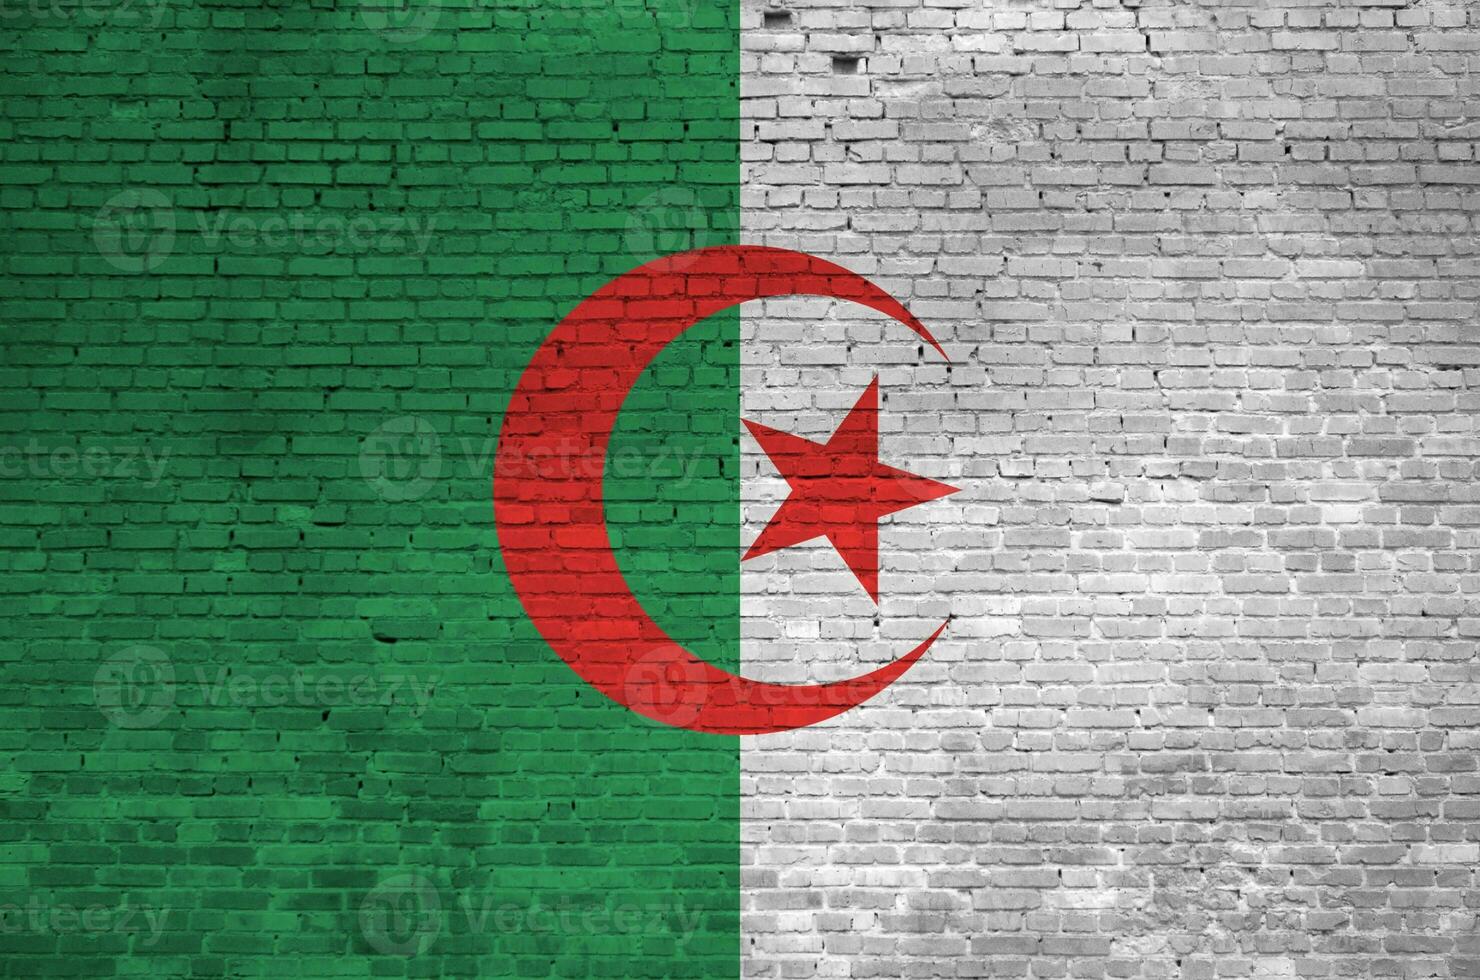 Algeria flag depicted in paint colors on old brick wall. Textured banner on big brick wall masonry background photo